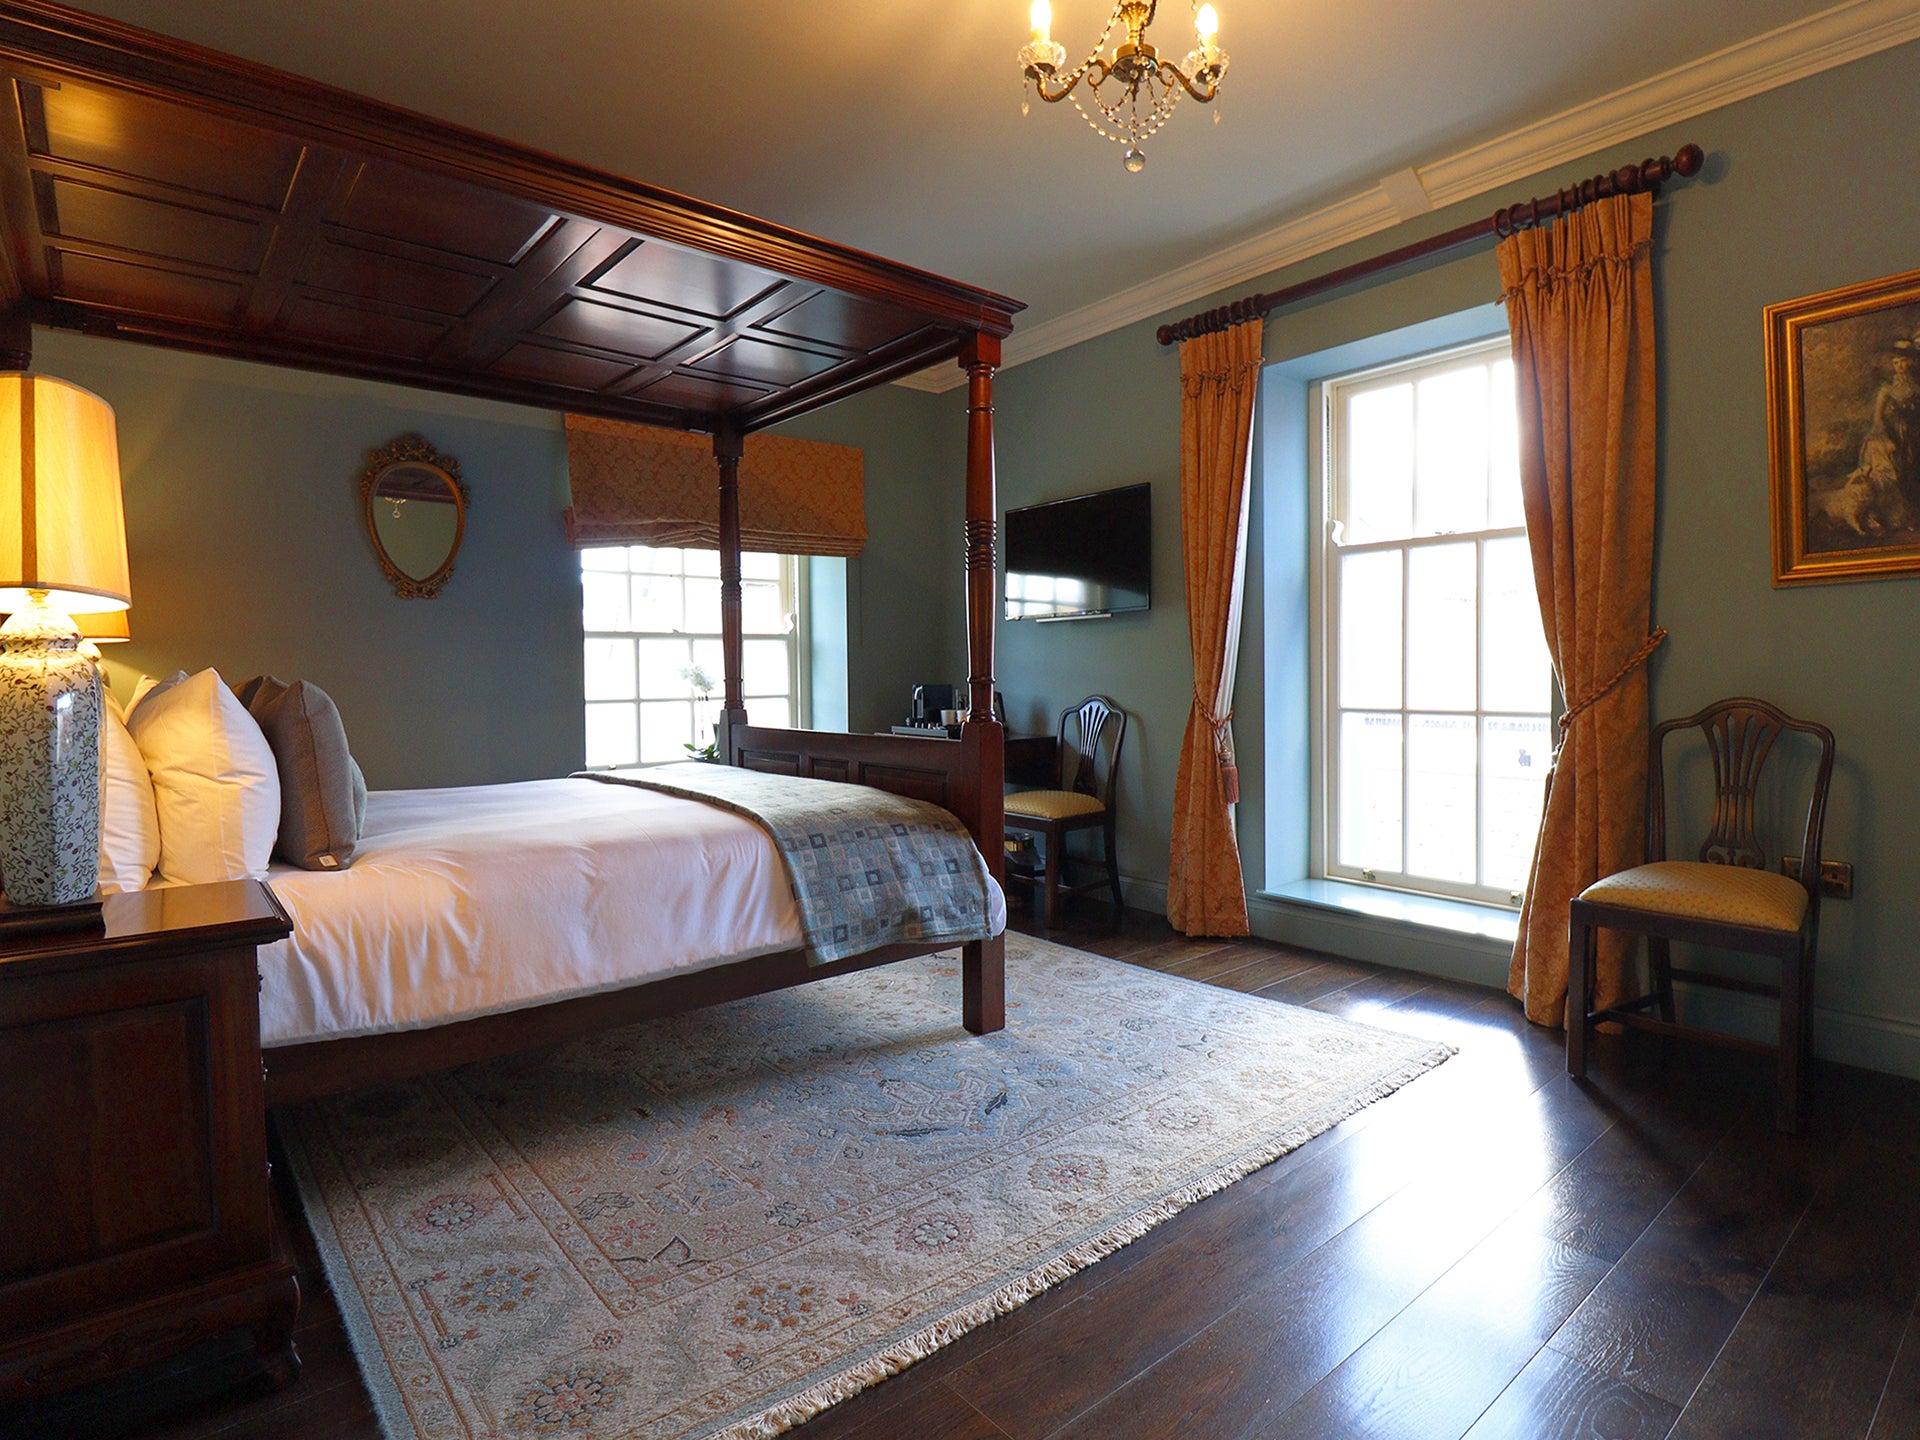 Rooms at The Georgian have four-poster beds